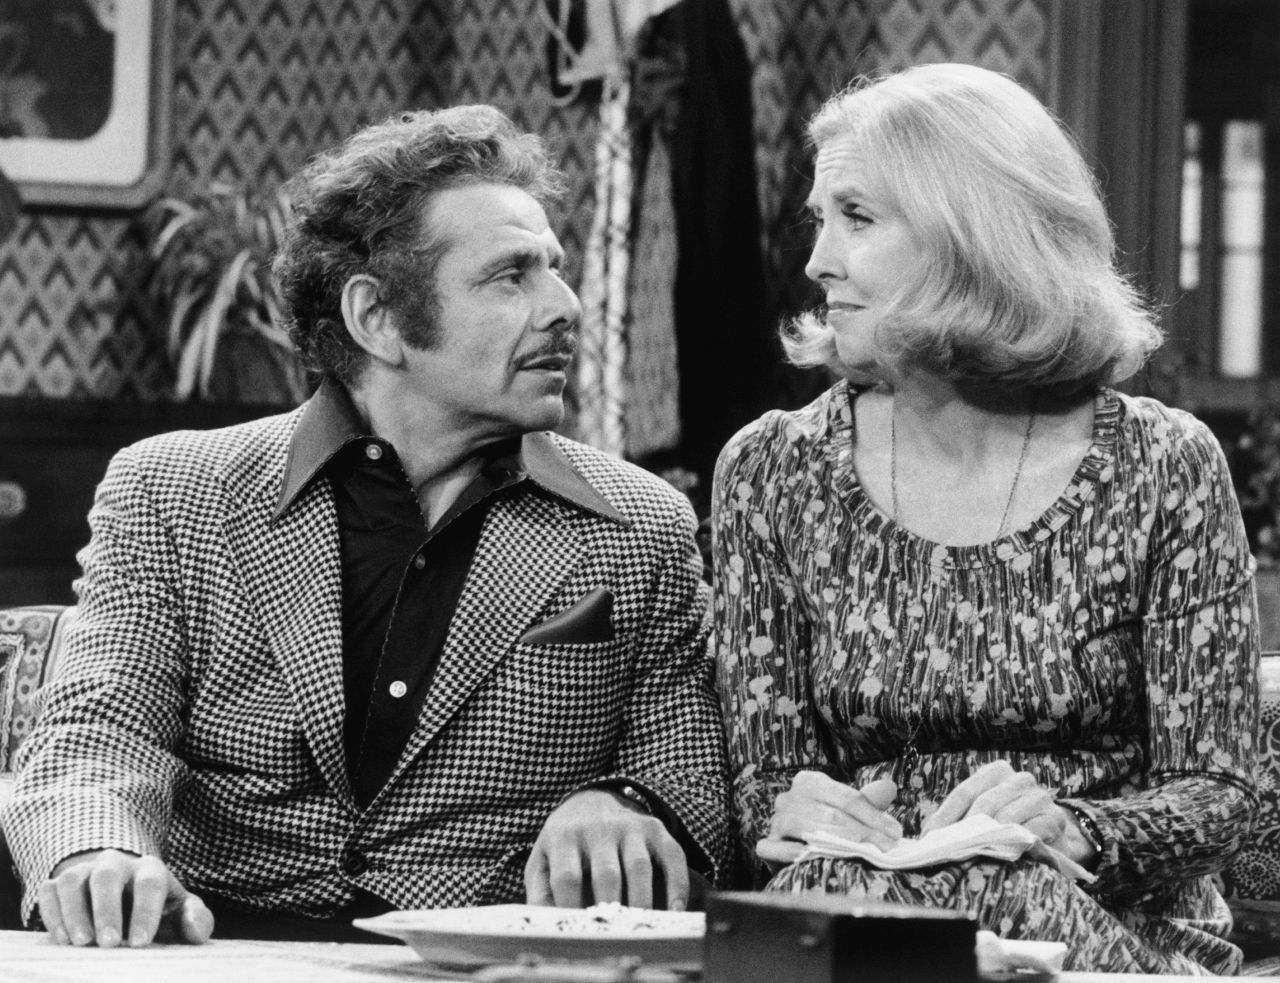 Meara and Stiller on an episode of "Rhoda" in 1976.  Meara appeared on the third season of the series as Sally Gallagher.